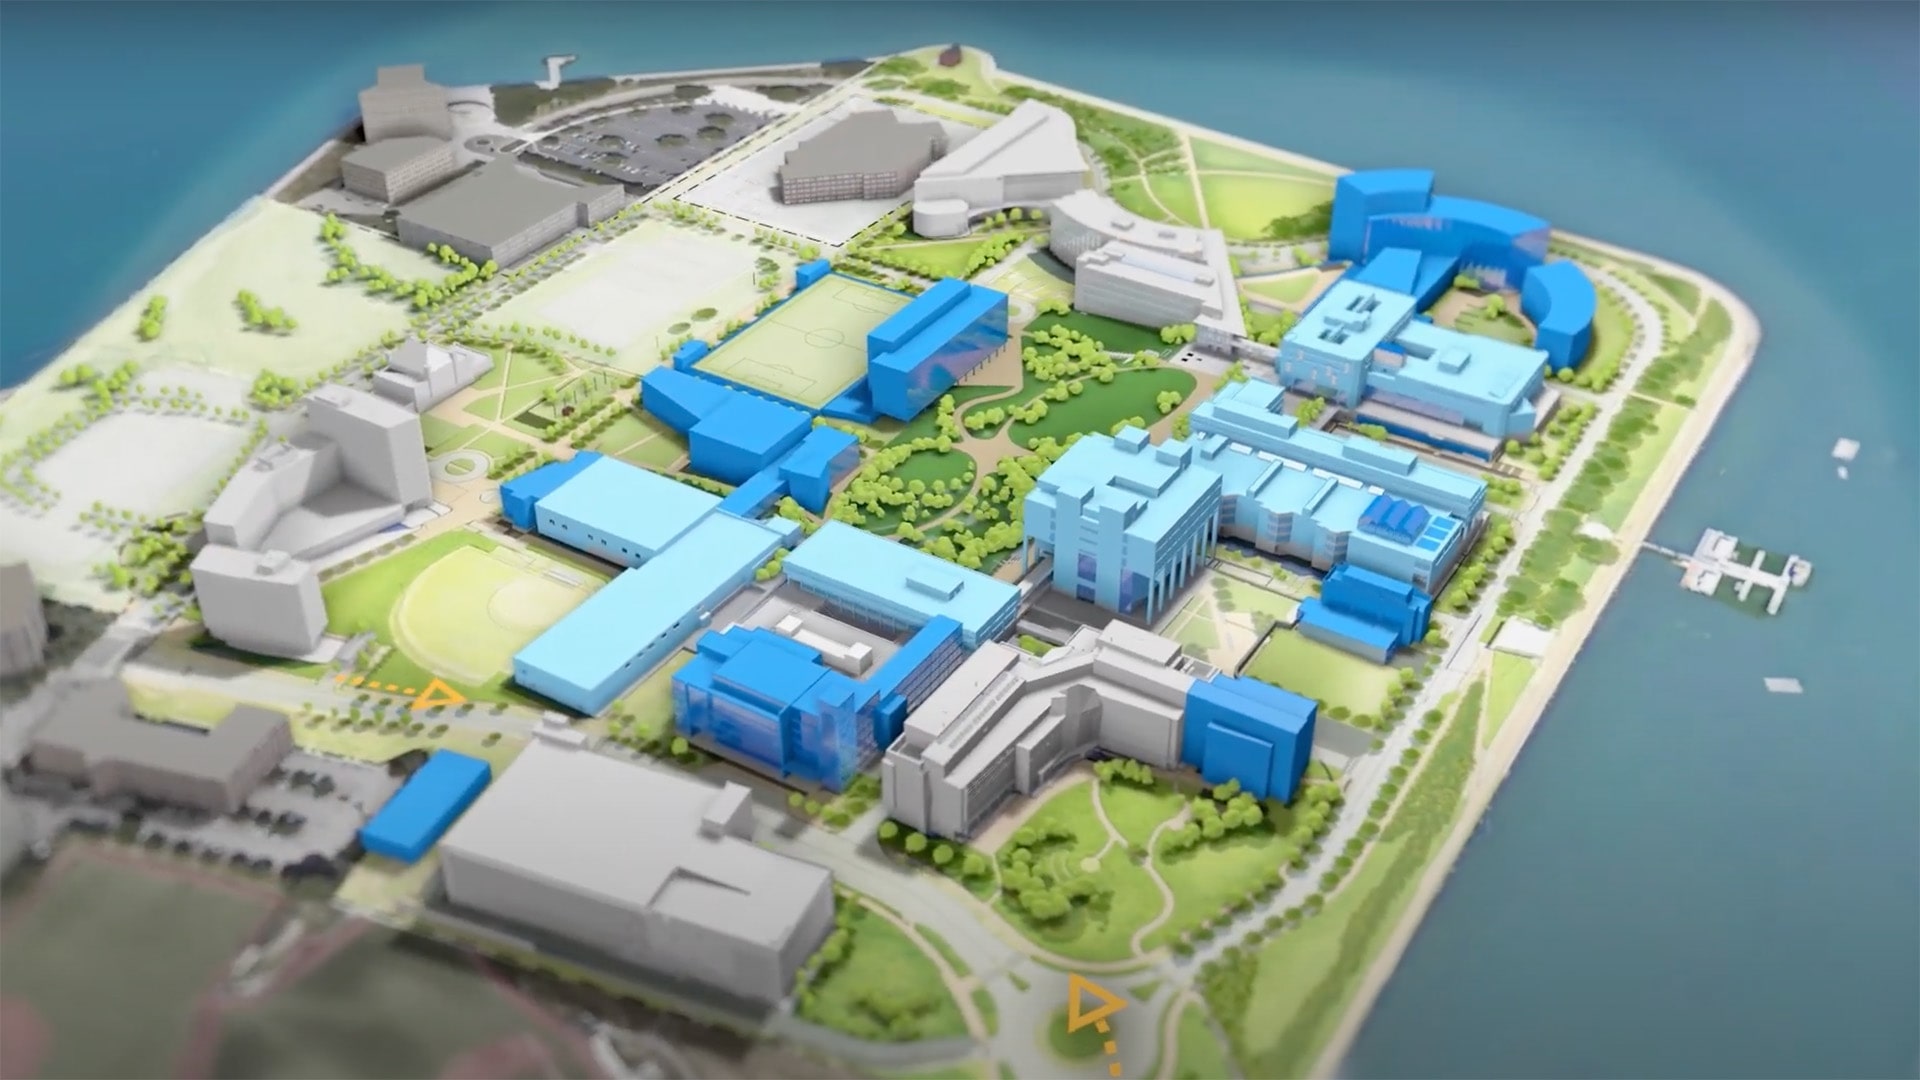 A rendering of the campus showing new building and pathways